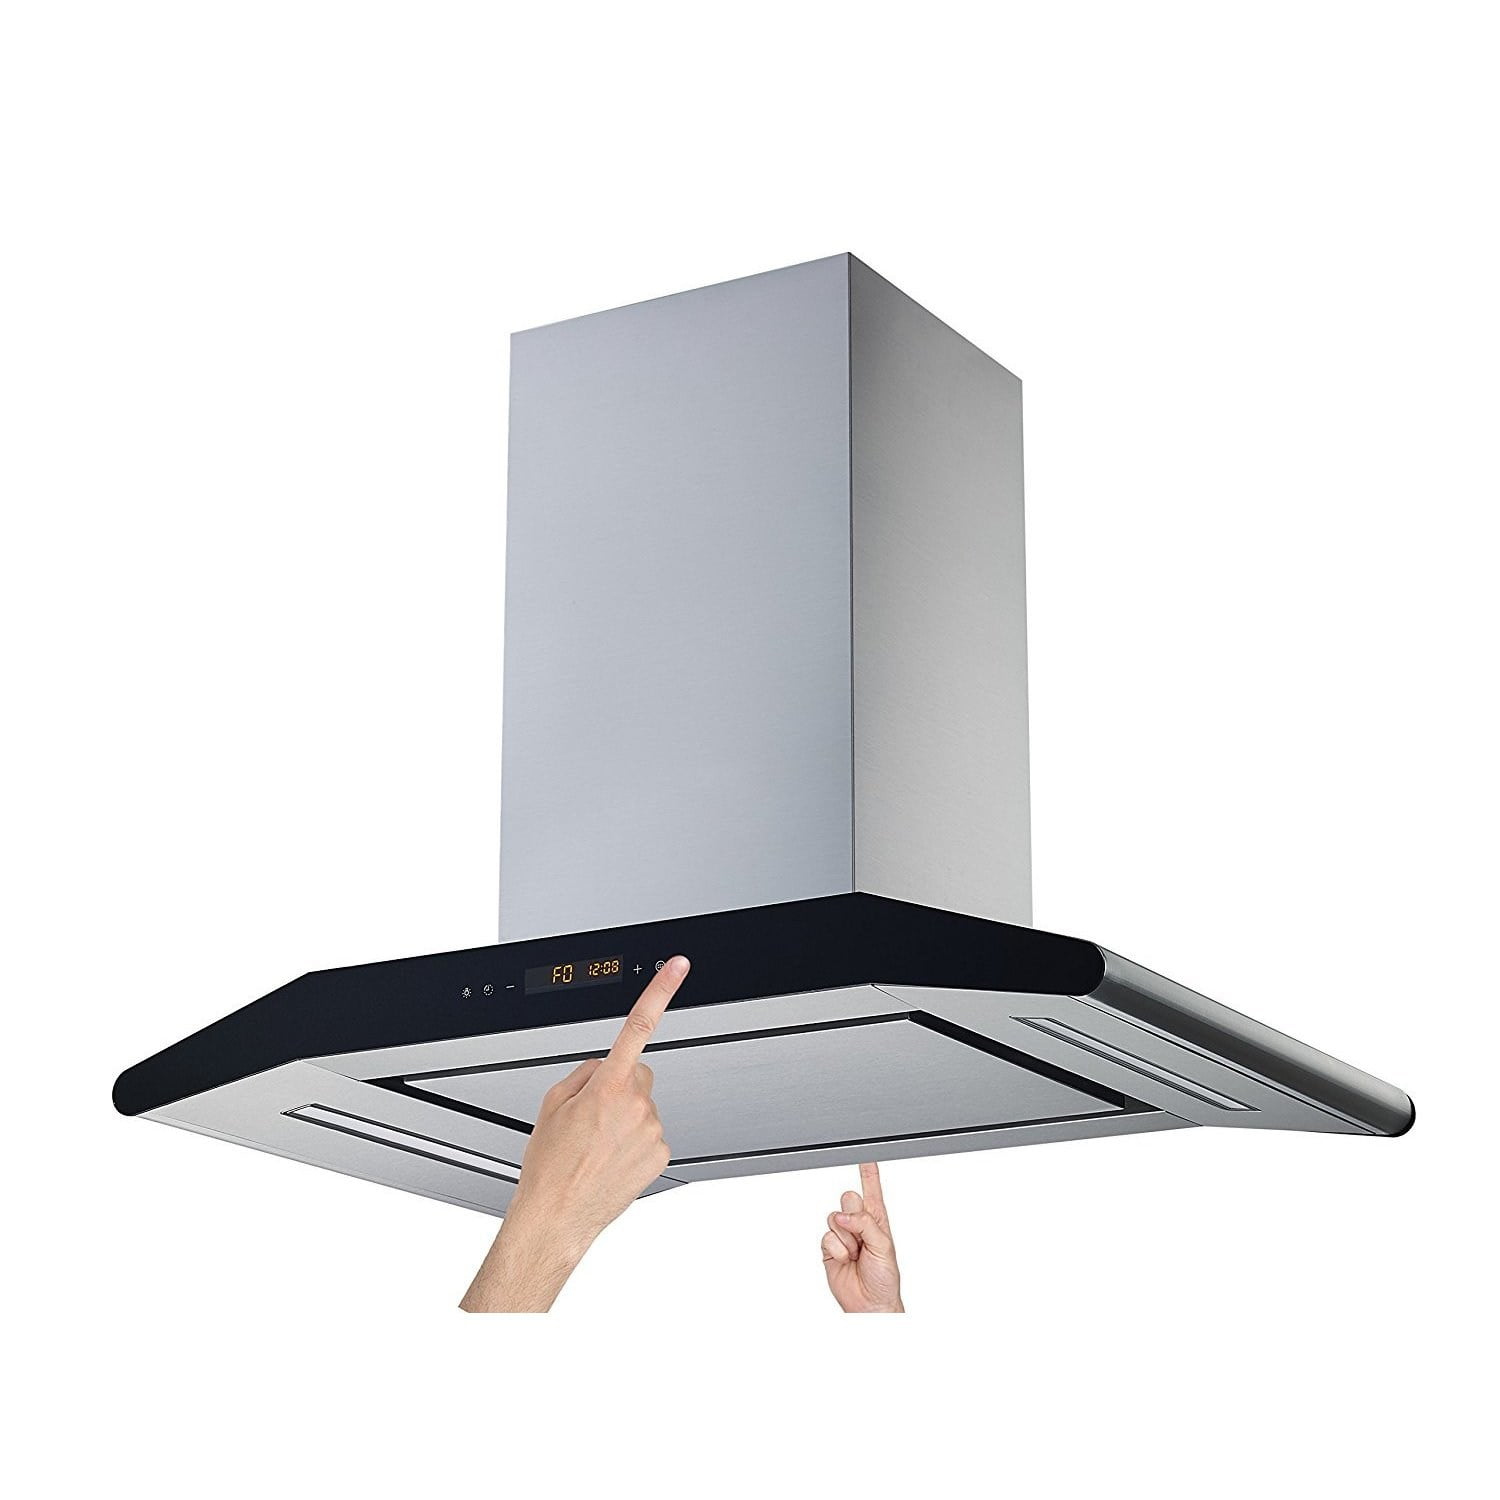 FIREGAS 30 inch Under Cabinet Range Hood with Ducted / Ductless Convertible  Slim Kitchen over Stove Vent, 3 Speed Exhaust Fan, Reusable Filter, LED  Lights in Stainless Steel 